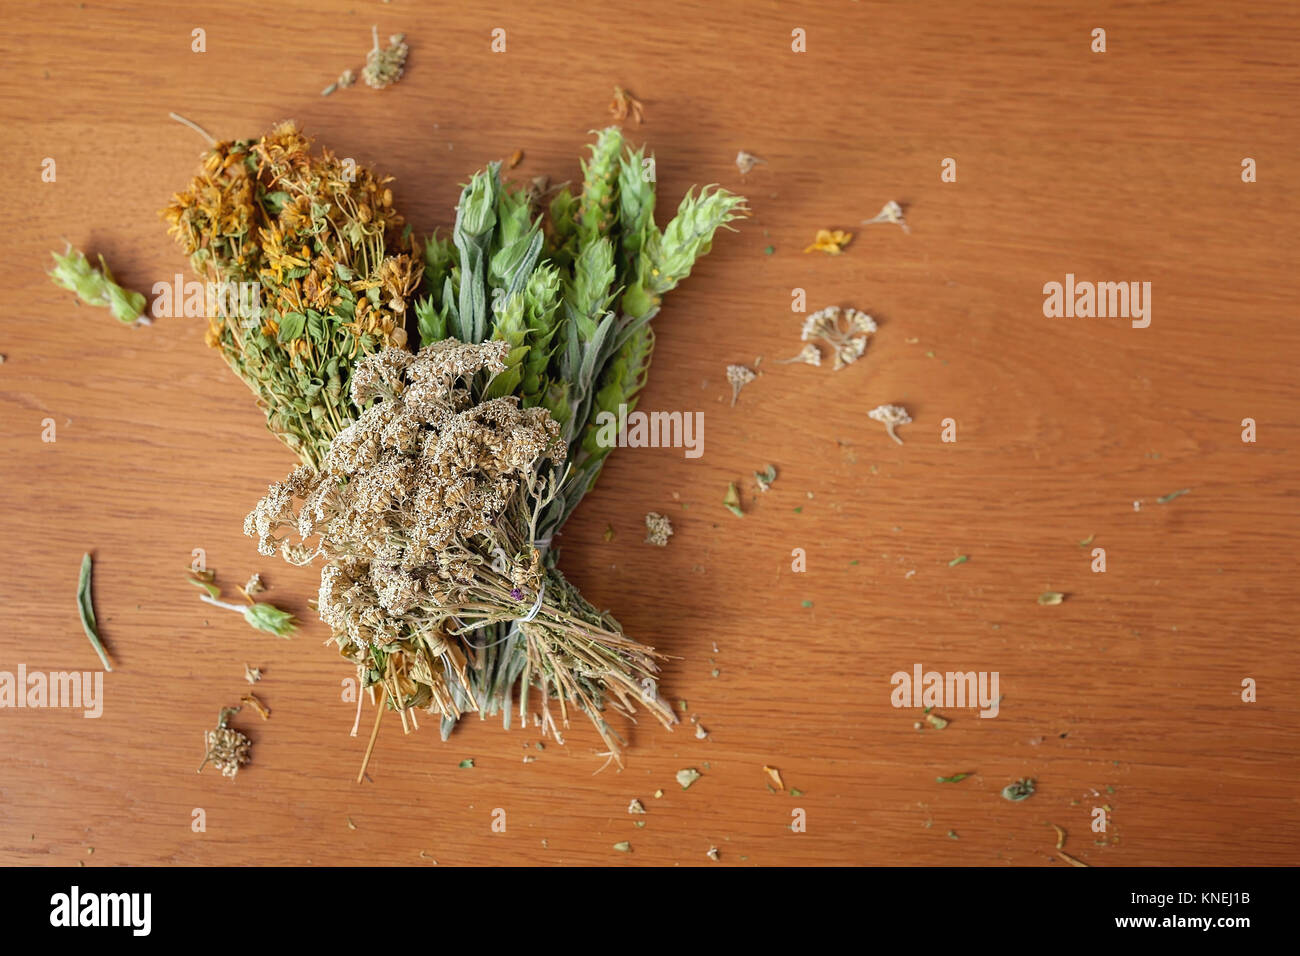 Bunches of dried herbs on a wooden table Stock Photo